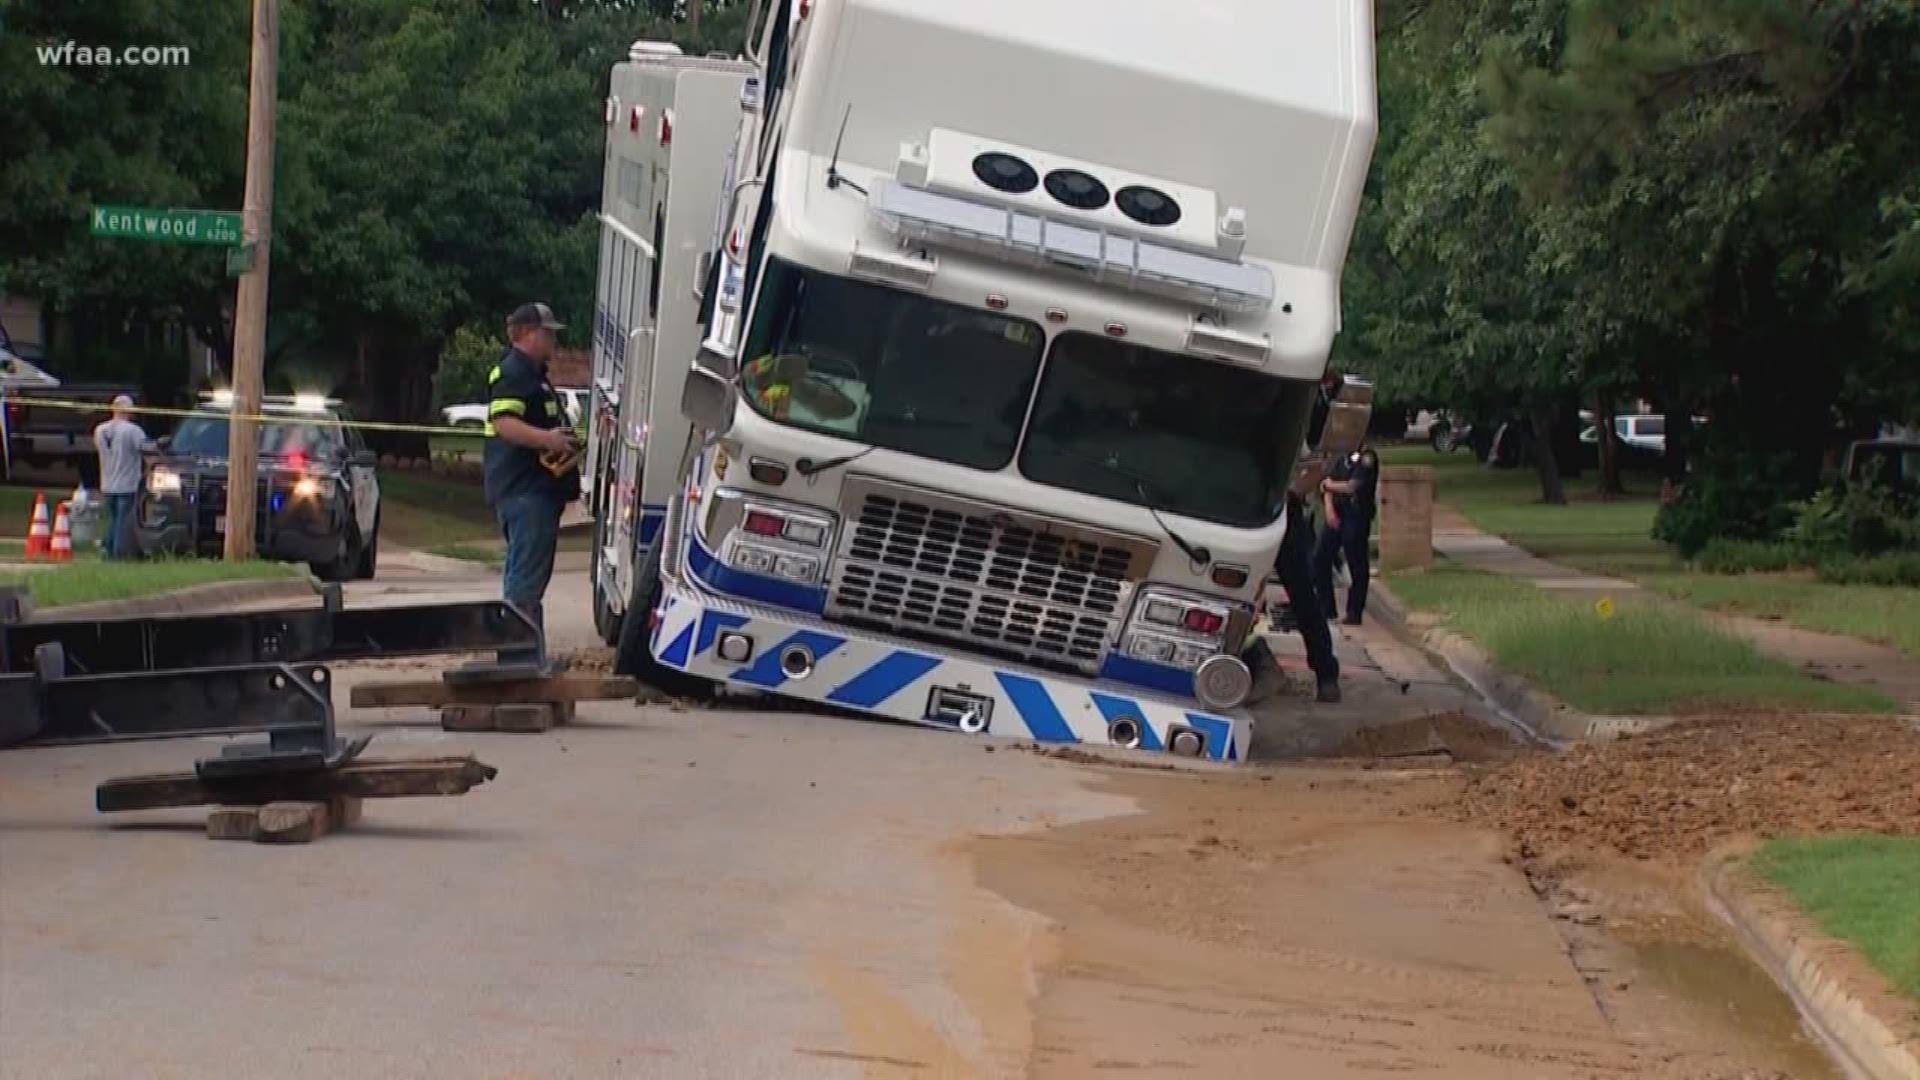 The front of a fire truck sank into the road where a water main broke on June 12, 2019 in Fort Worth.